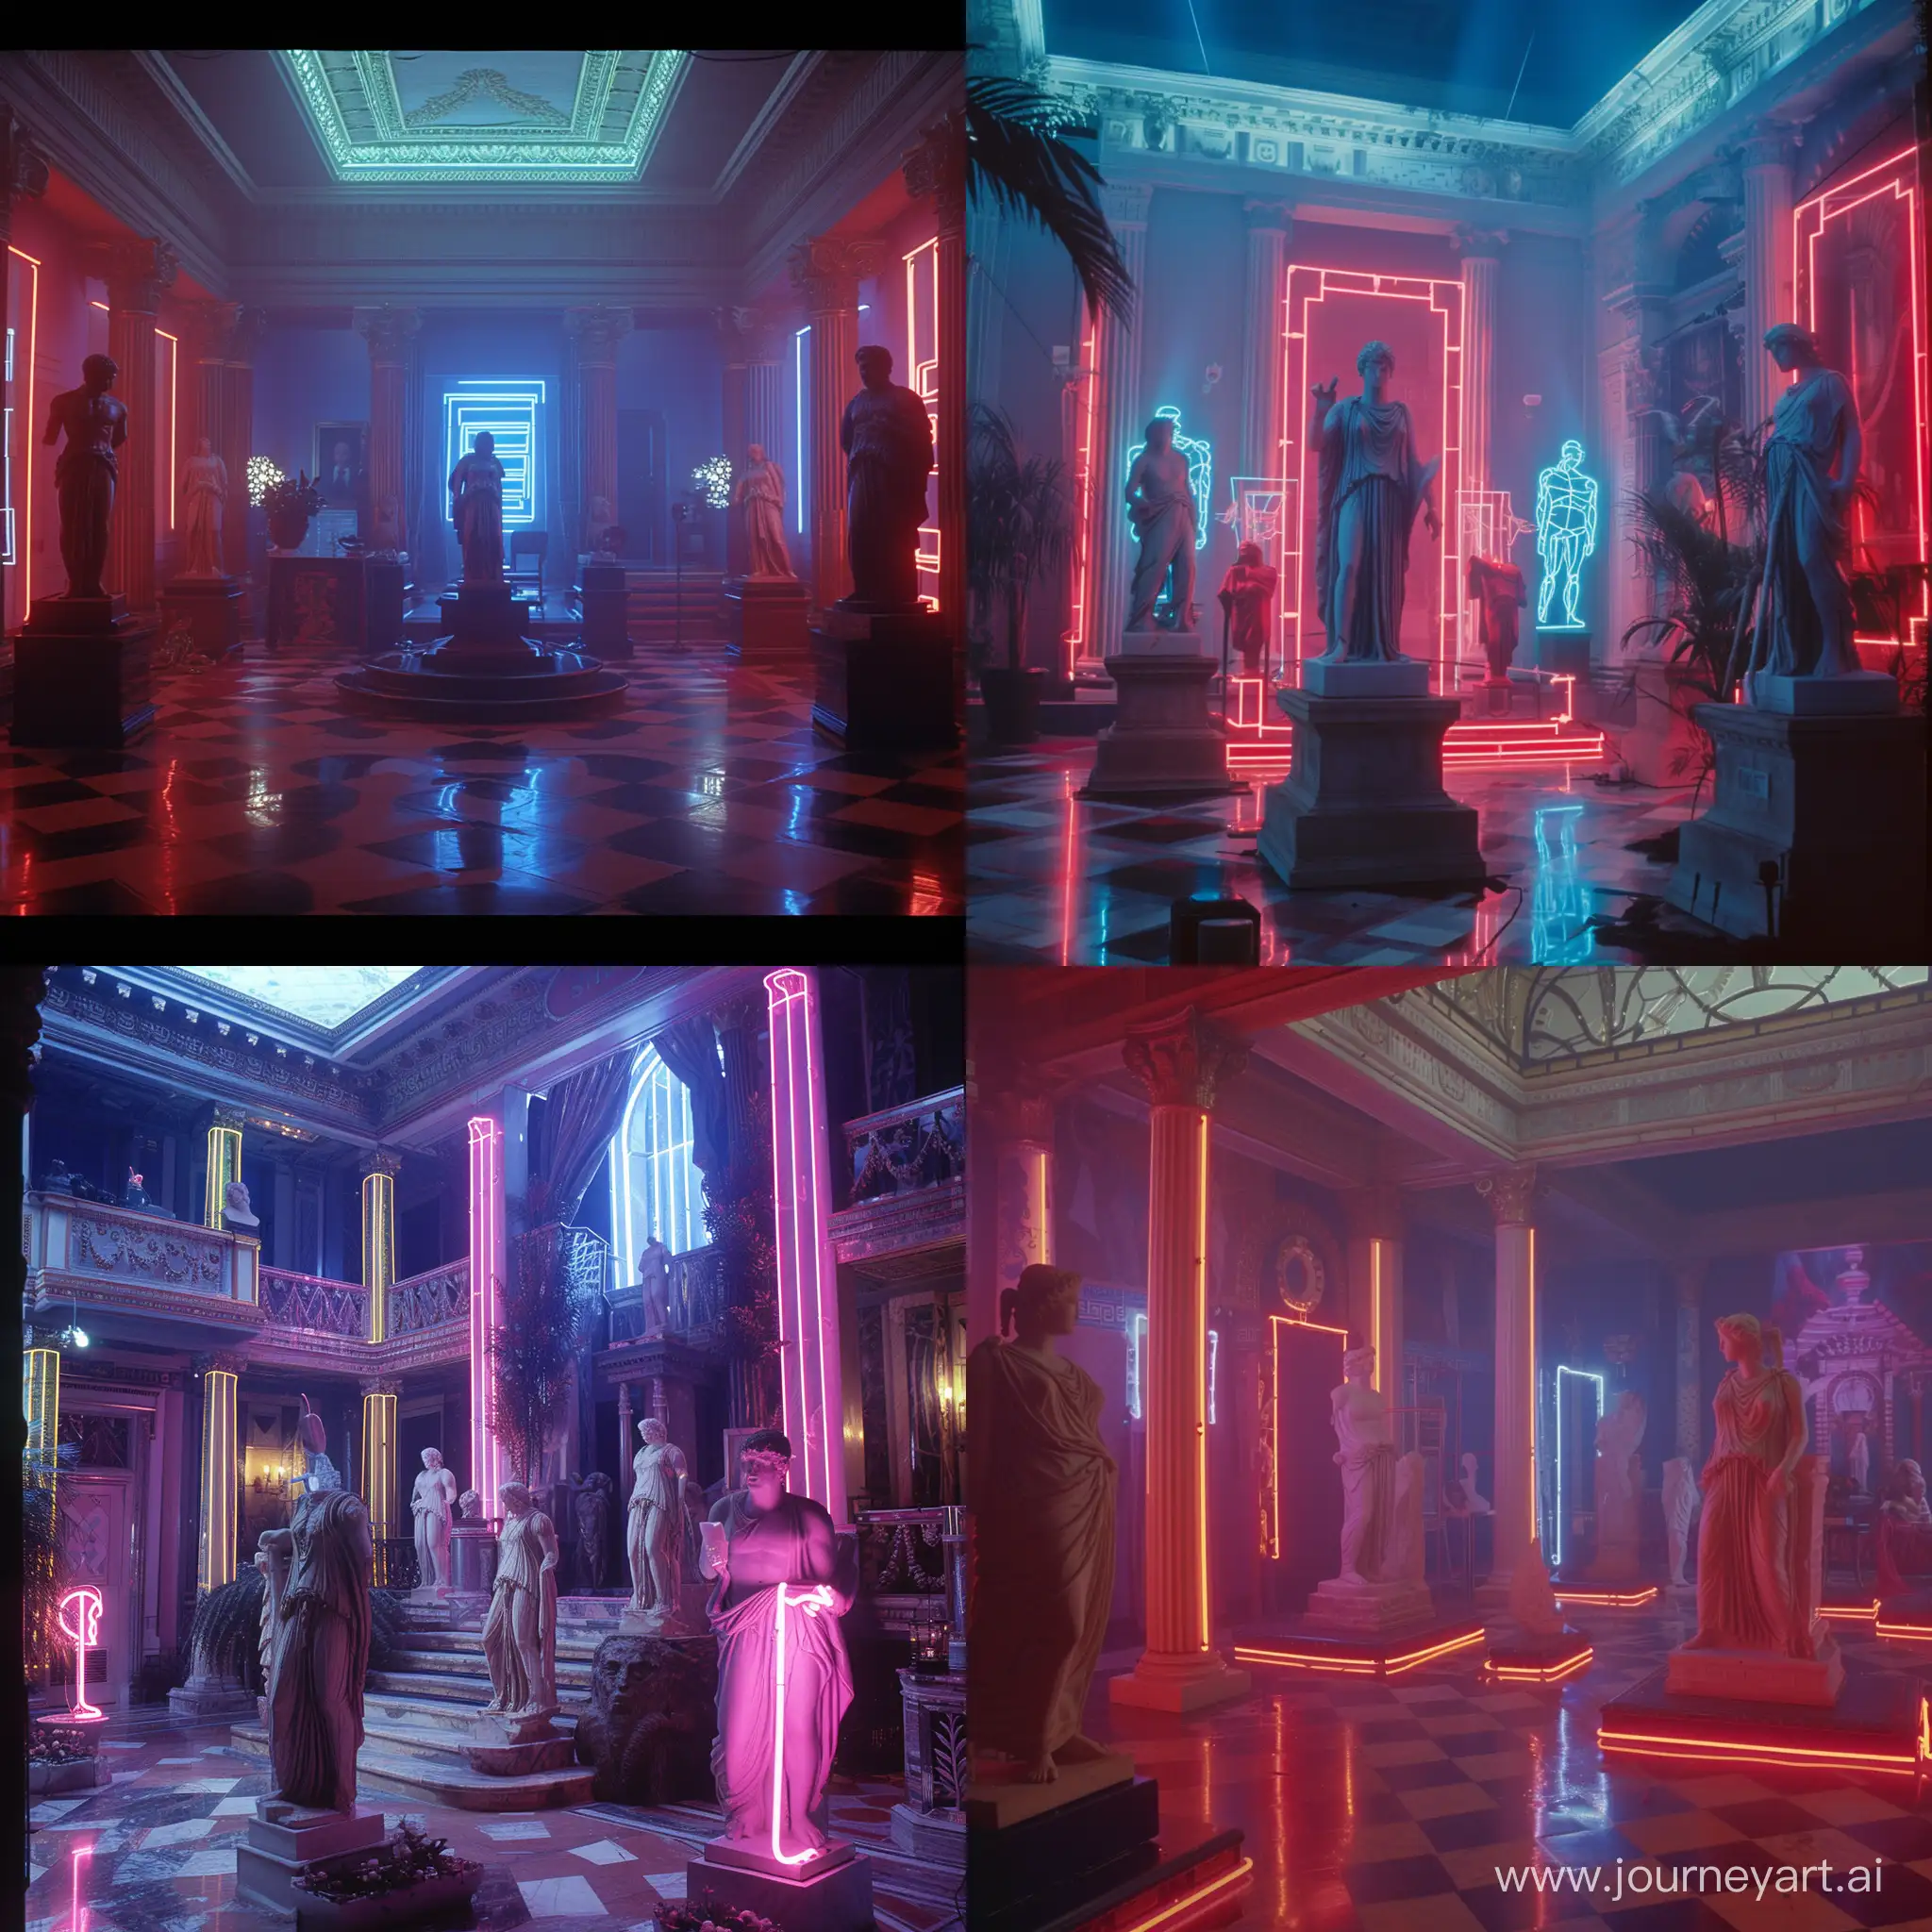 Cinematic scene from a John Carpenter film from the 1980s showing a millionaire's house with ancient Greek style and decoration, with statues, neon lights